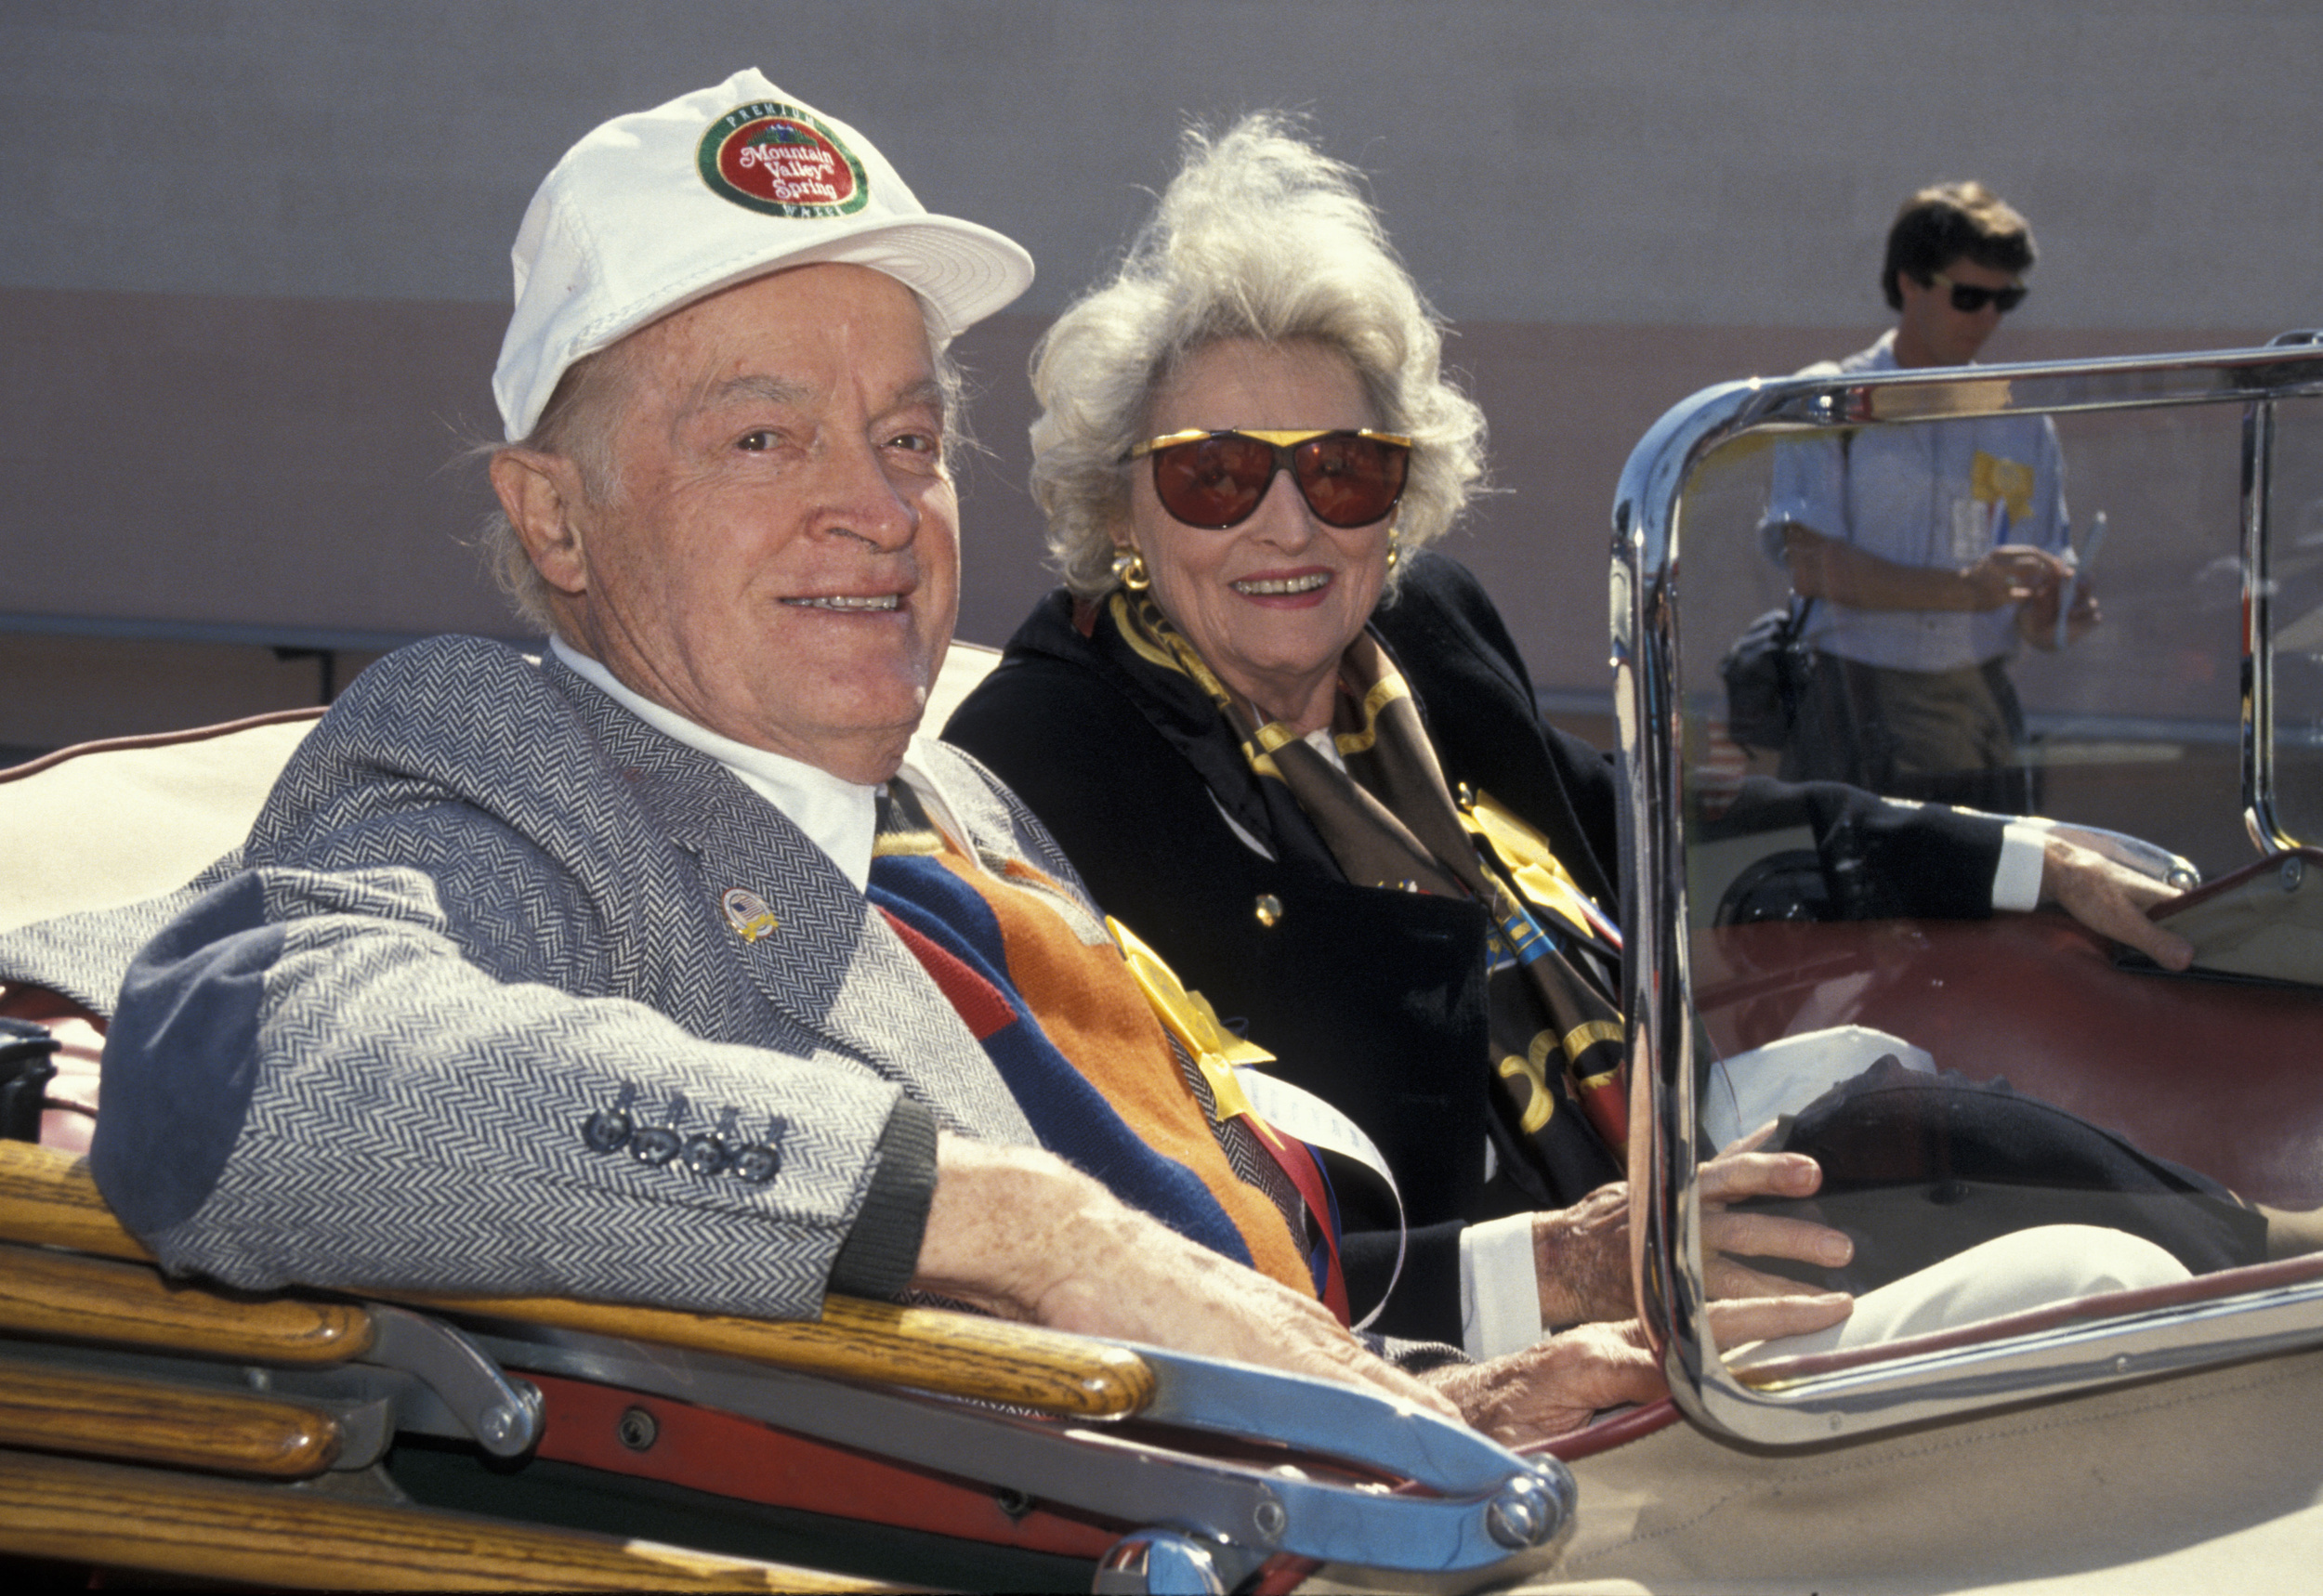 <p>Yes, Bob Hope’s wife was also a centenarian. Talk about a power couple. Before Dolores met Bob, she had a career as a model and a singer. Once they married, Dolores continued to sing and joined Bob on his USO tours. Dolores has her own star on the Hollywood Walk of Fame.</p><p><a href='https://www.msn.com/en-us/community/channel/vid-cj9pqbr0vn9in2b6ddcd8sfgpfq6x6utp44fssrv6mc2gtybw0us'>Follow us on MSN to see more of our exclusive entertainment content.</a></p>